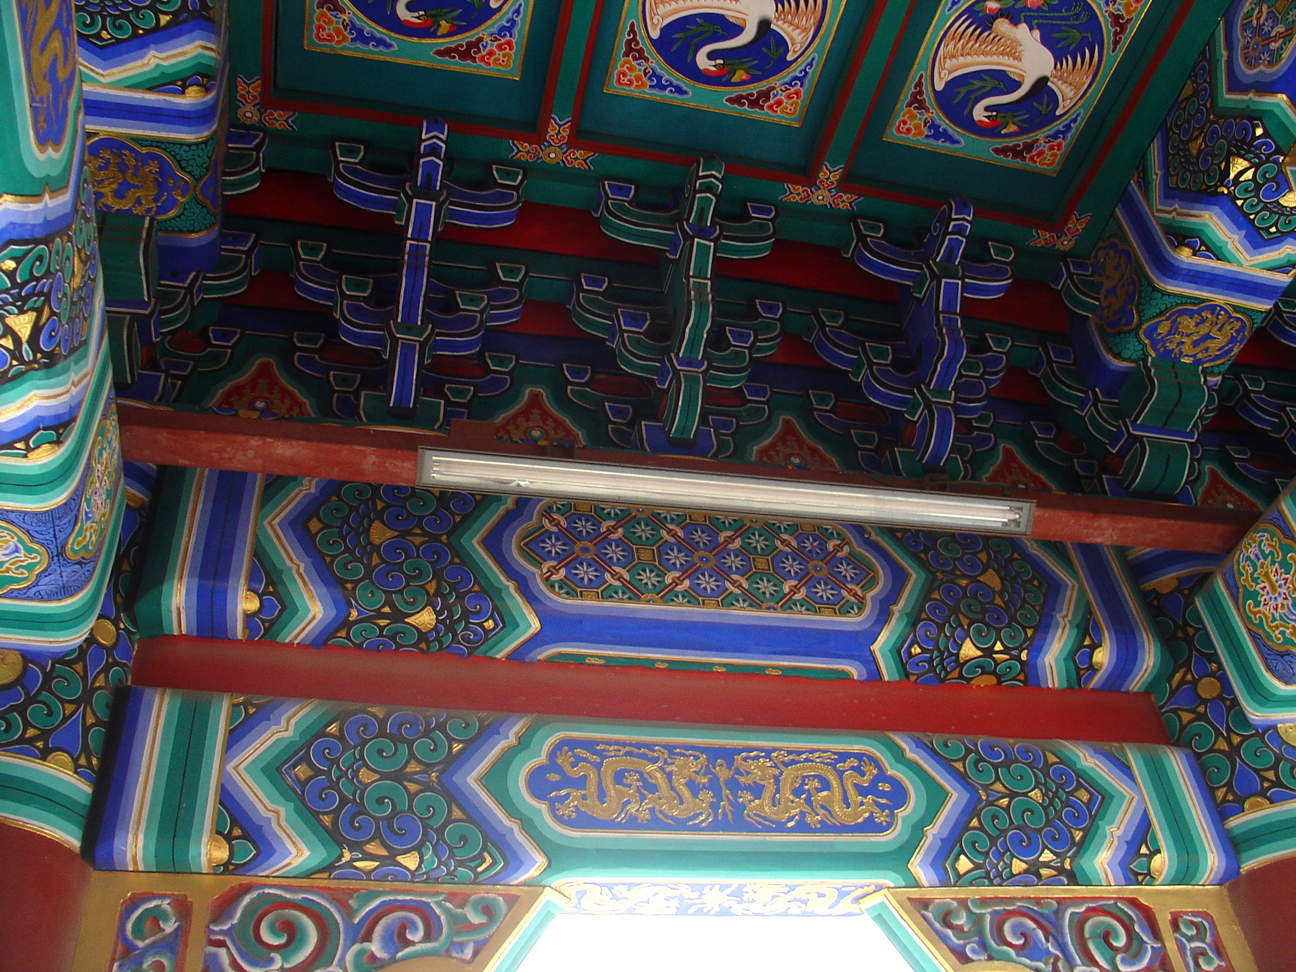 The ceiling decoration of a buddhist temple